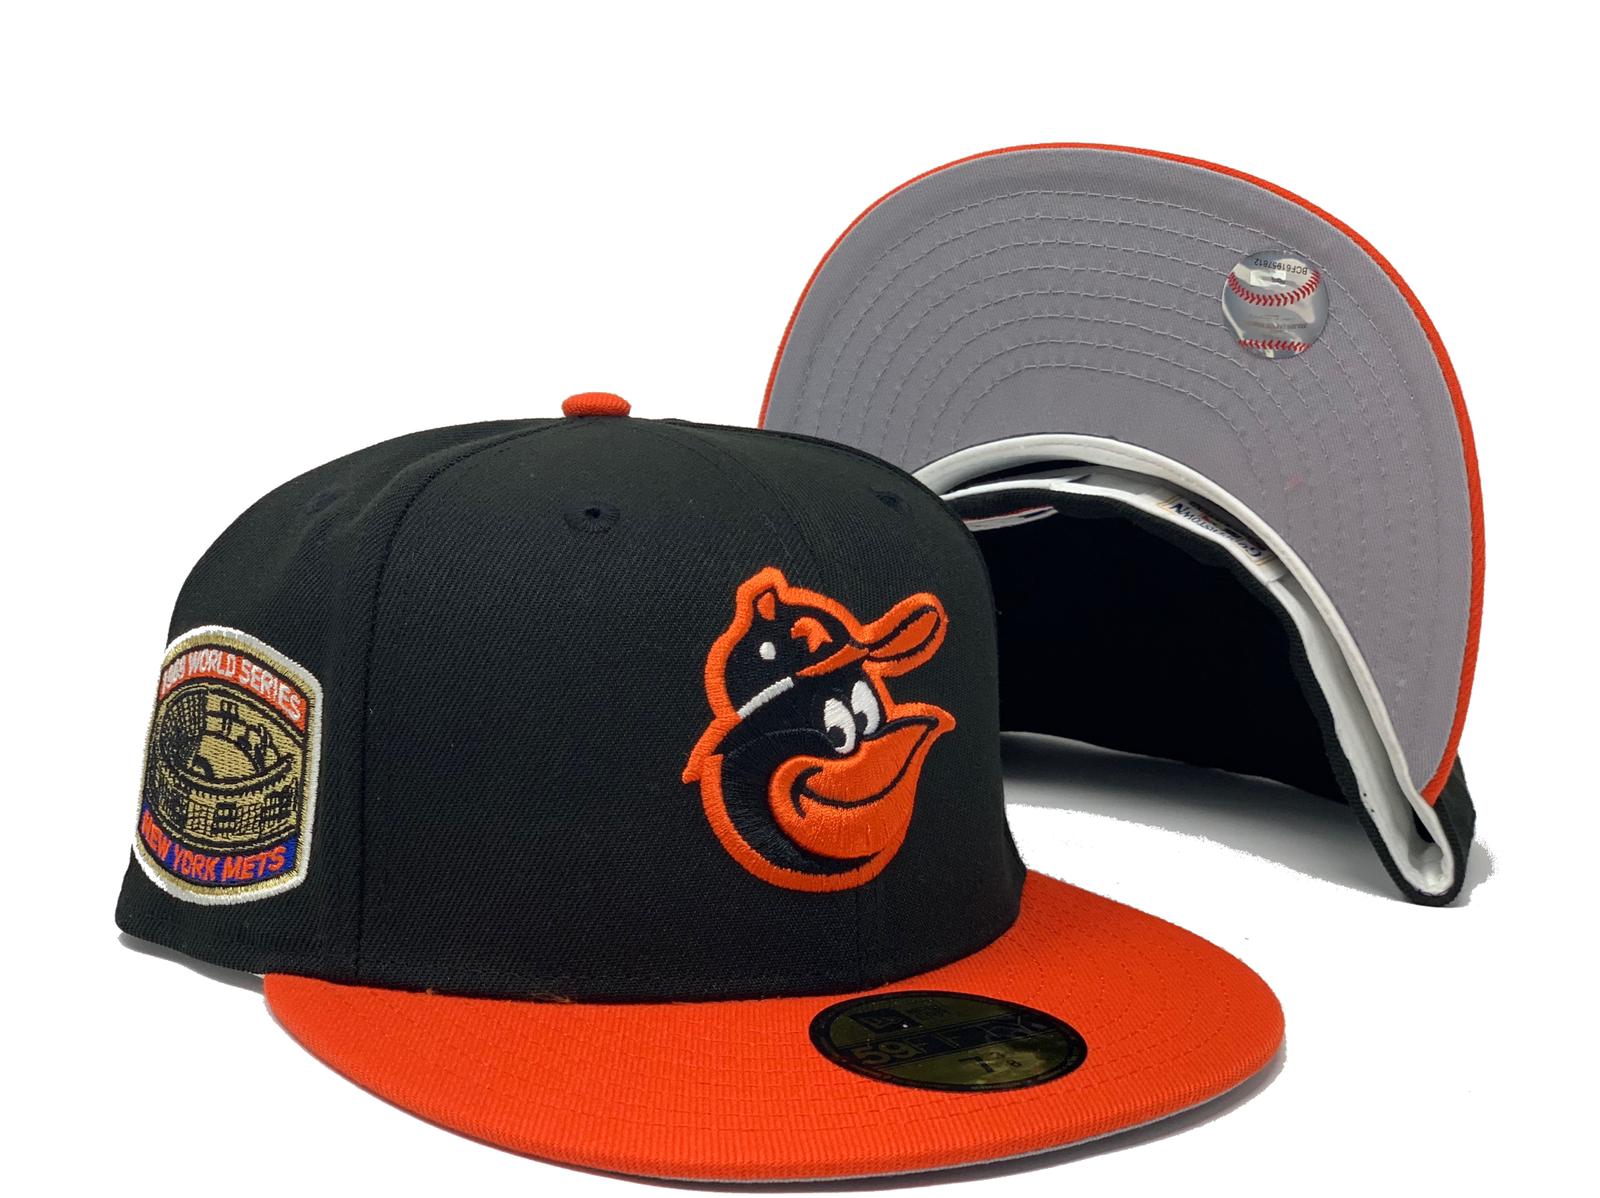 Men's Baltimore Orioles Majestic Heathered Gray Cooperstown